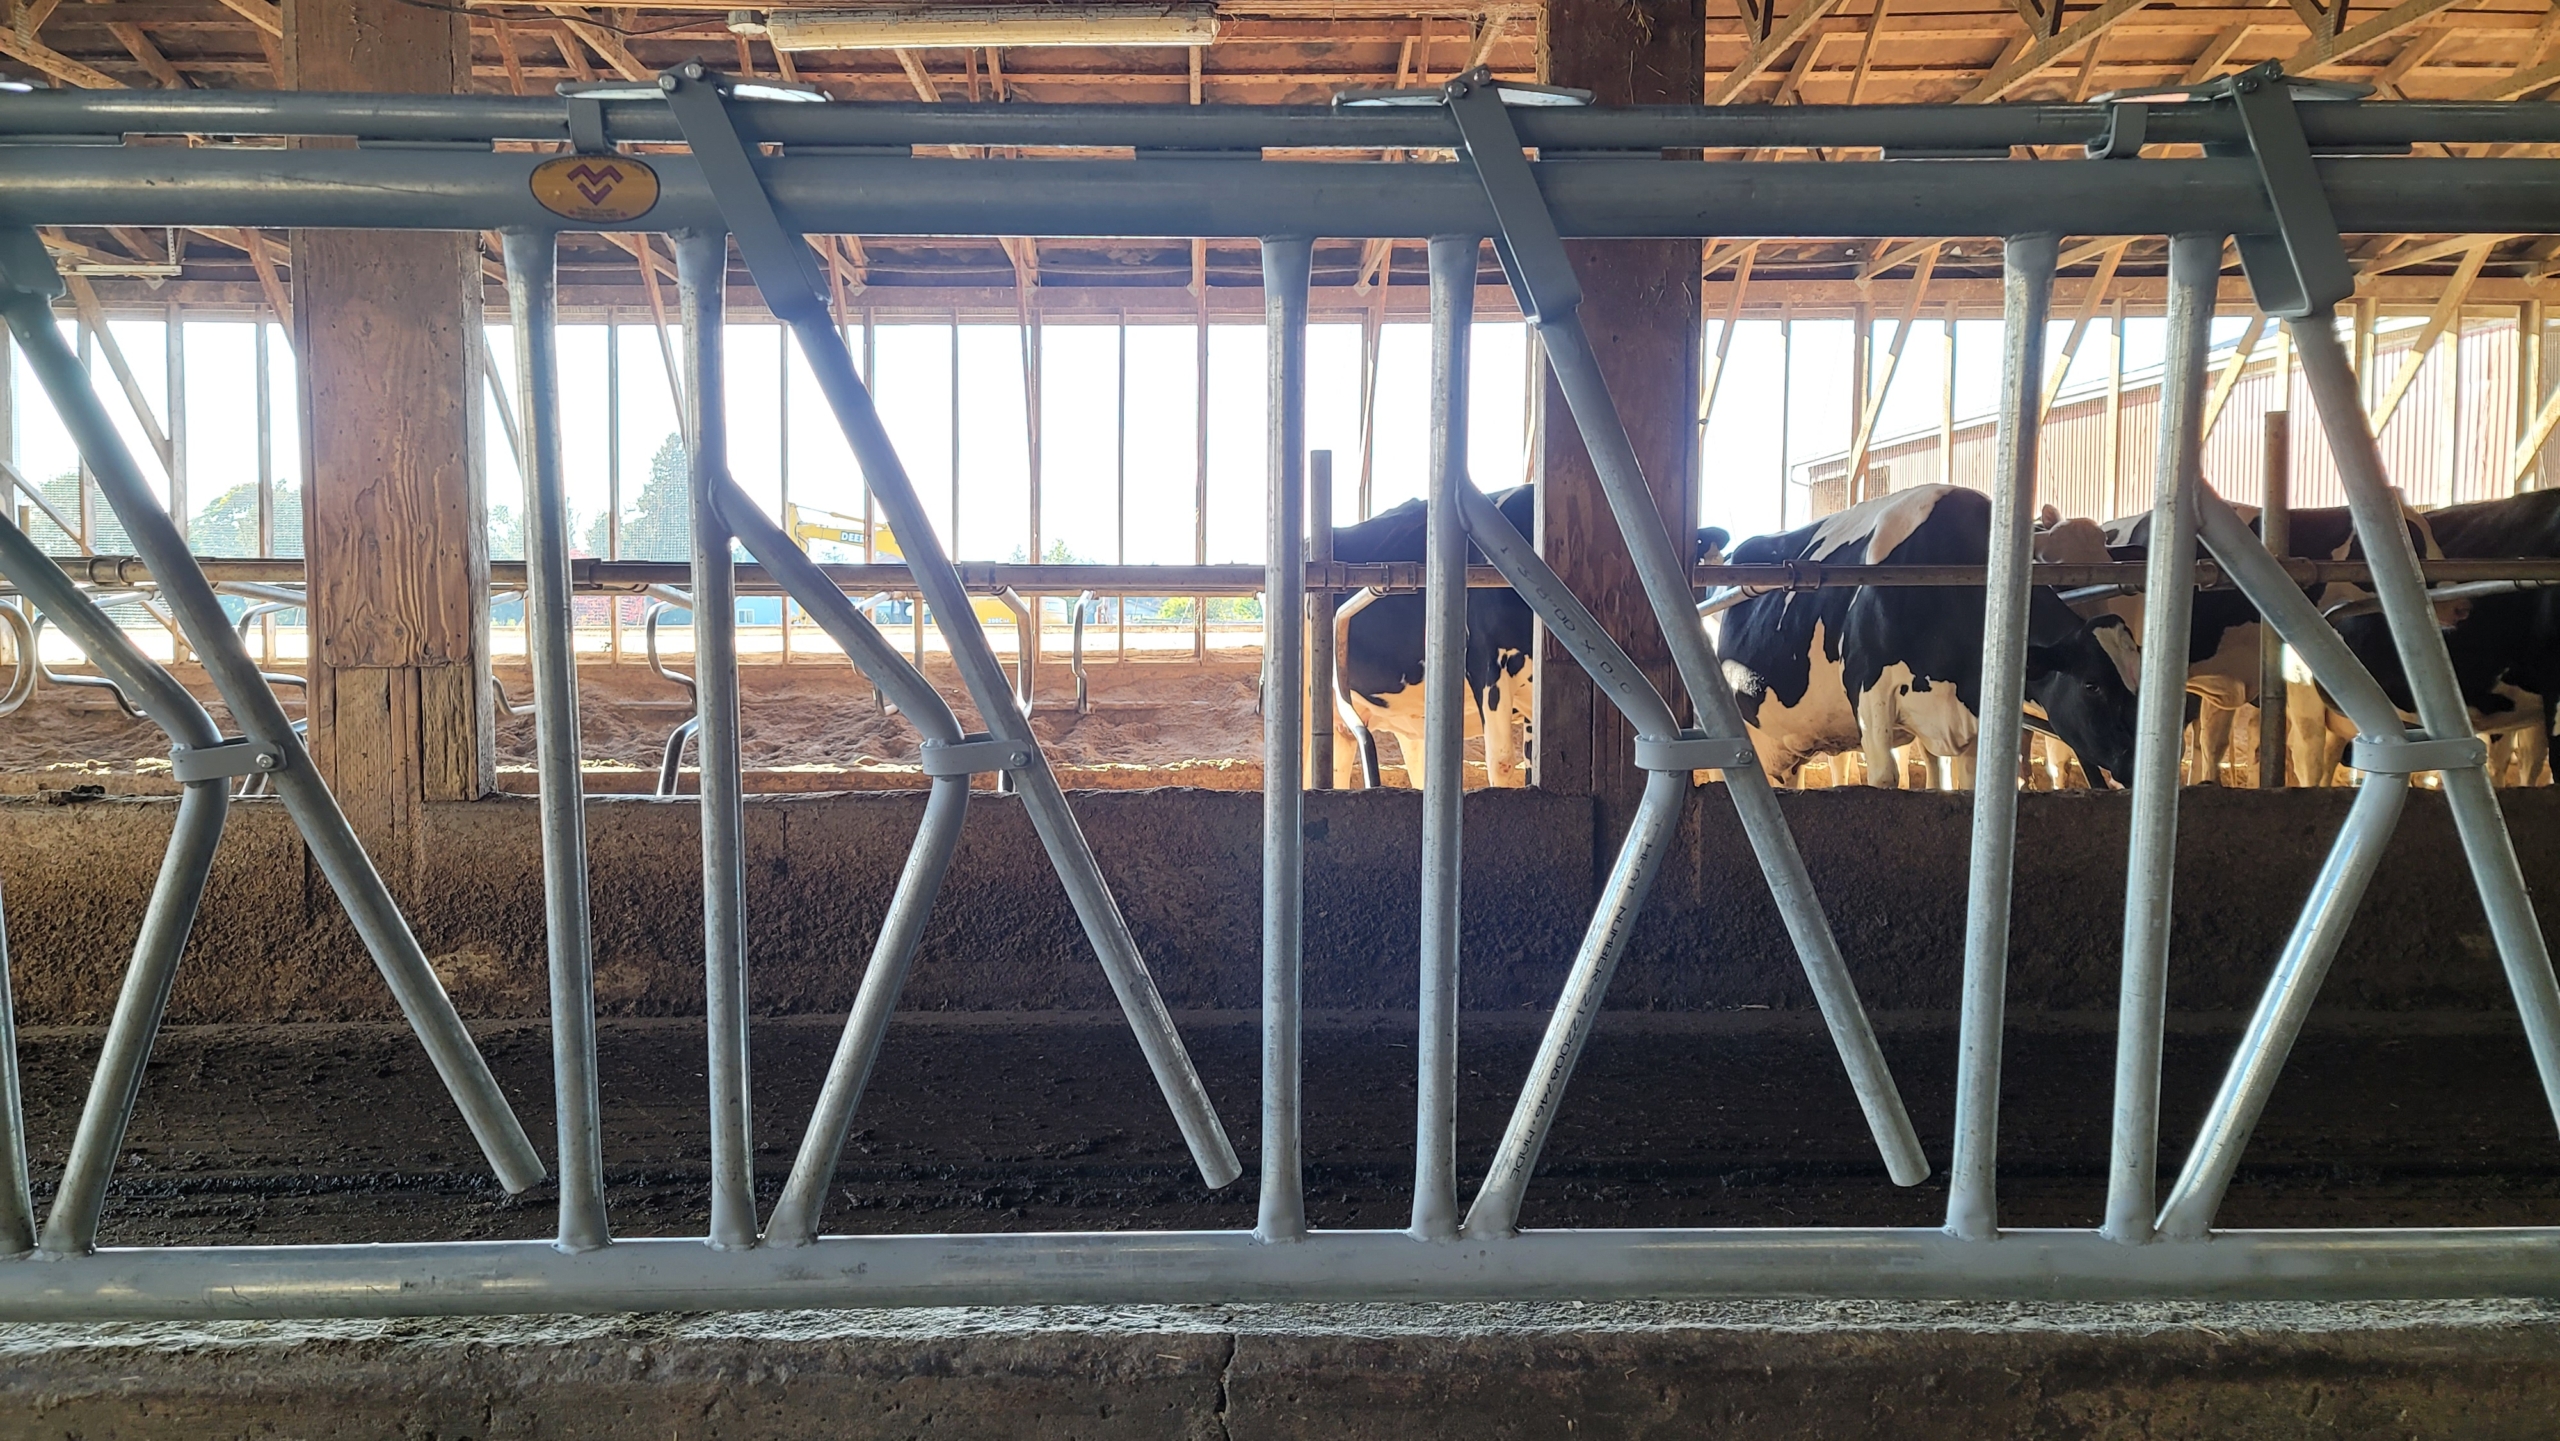 Looking at dairy cows through metal cow stanchions.